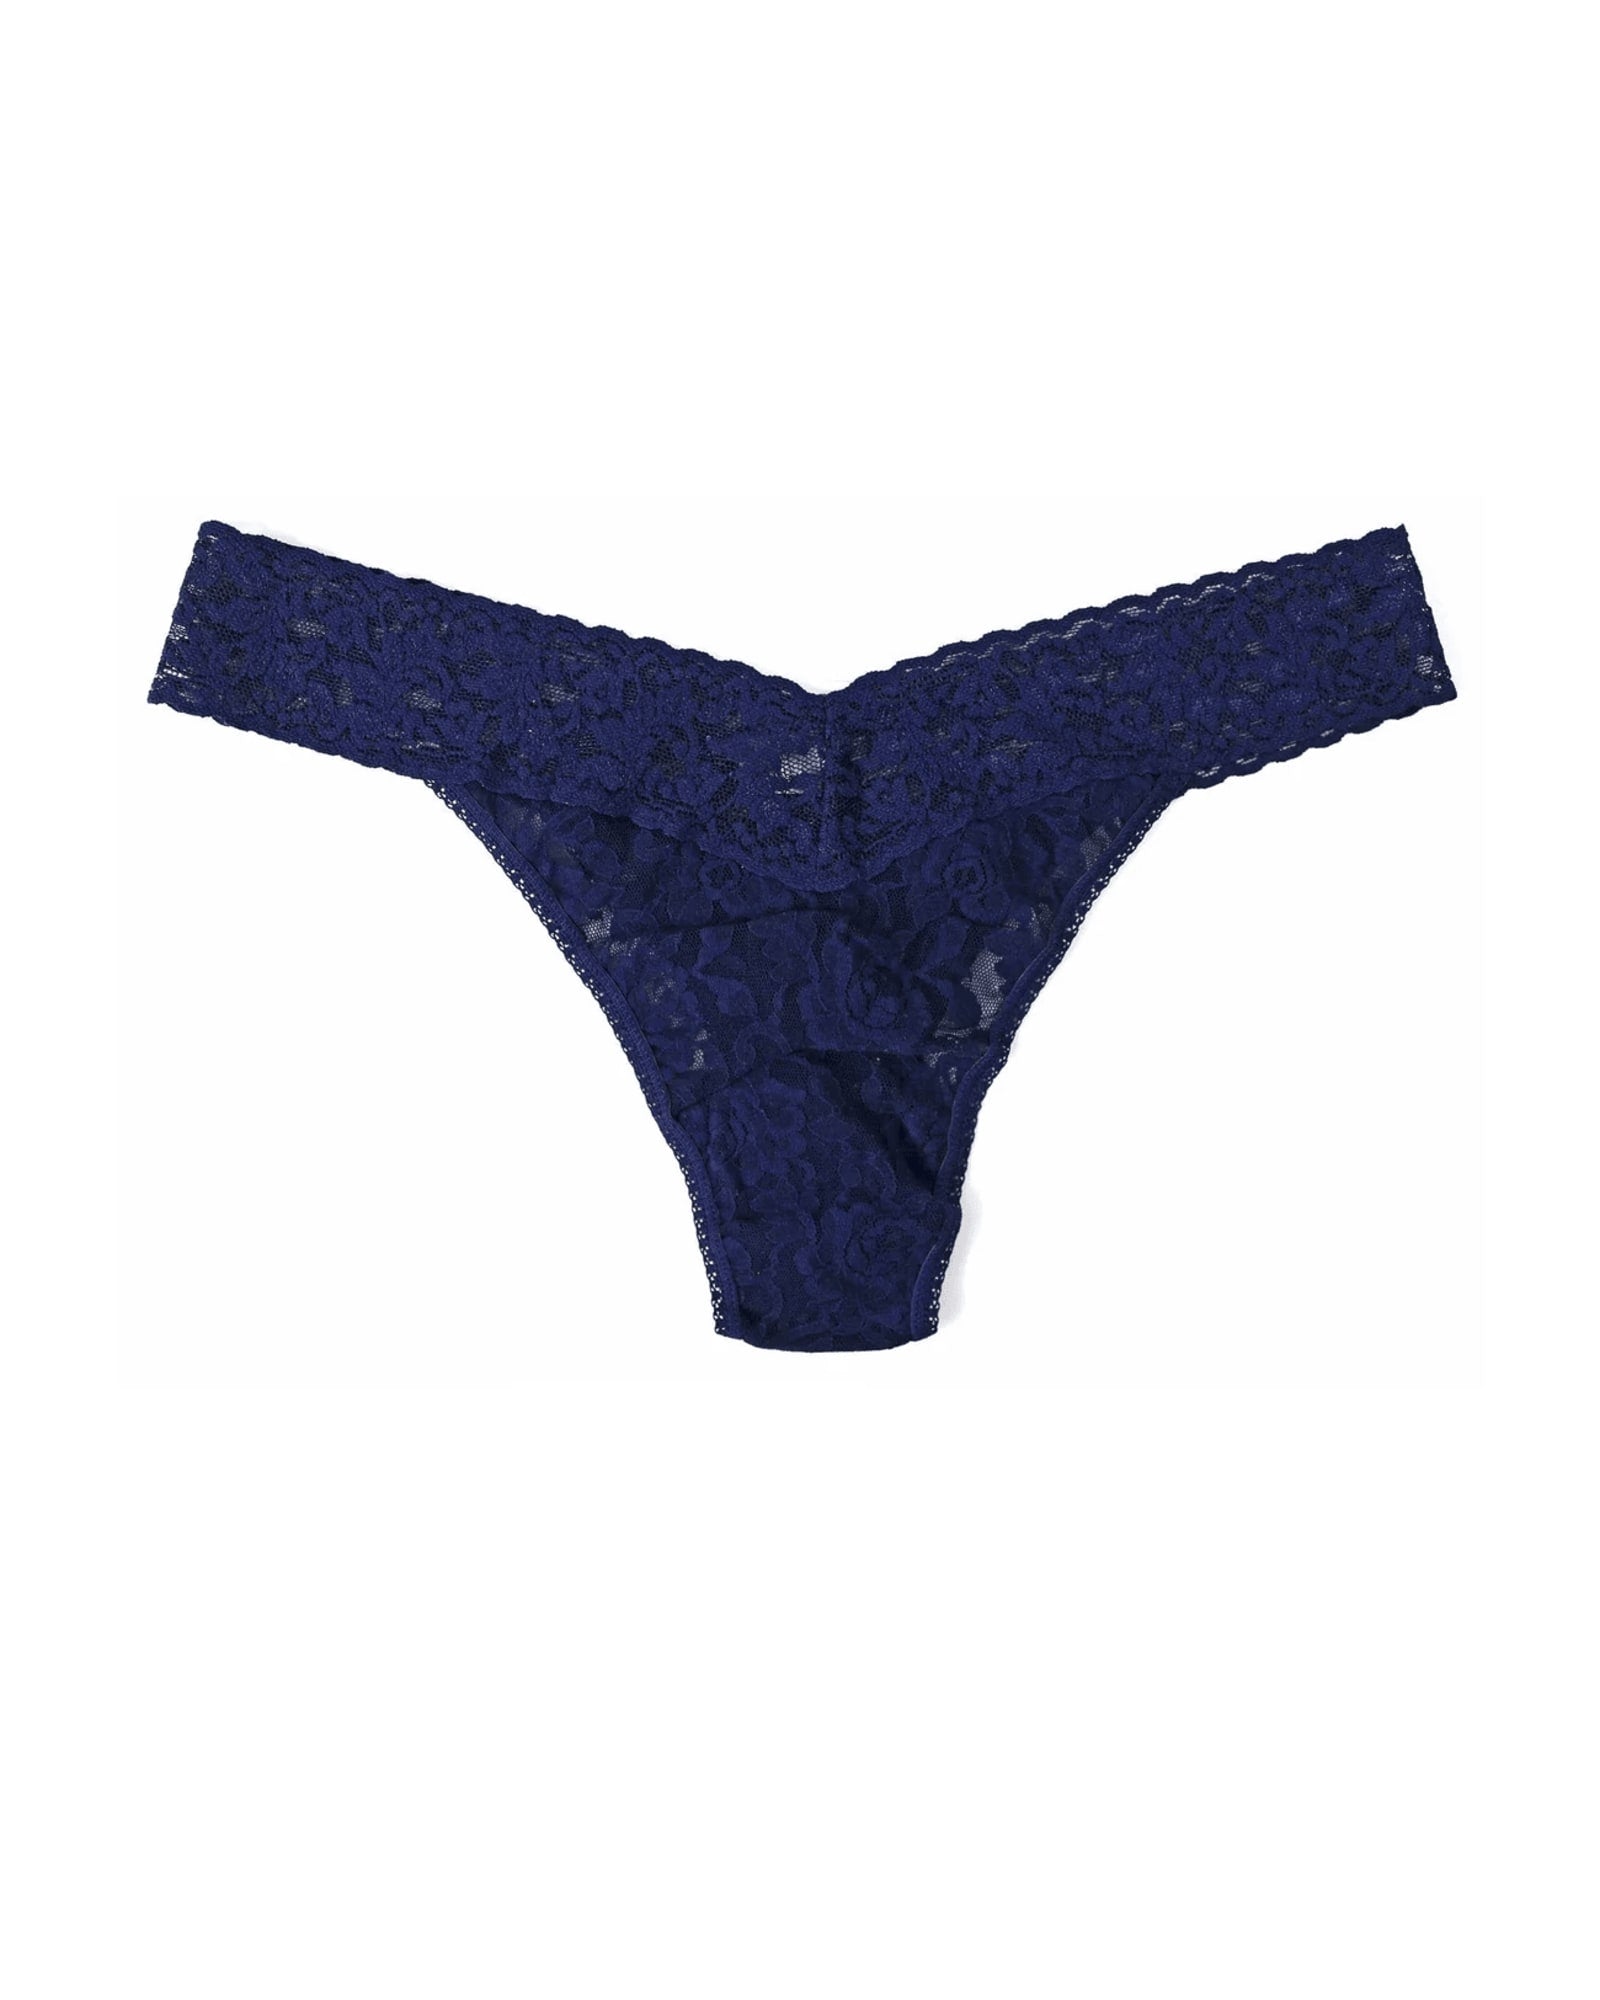 Sexy Bra Padded Royal Blue Sequins Lace Ladies Underwear Lingerie